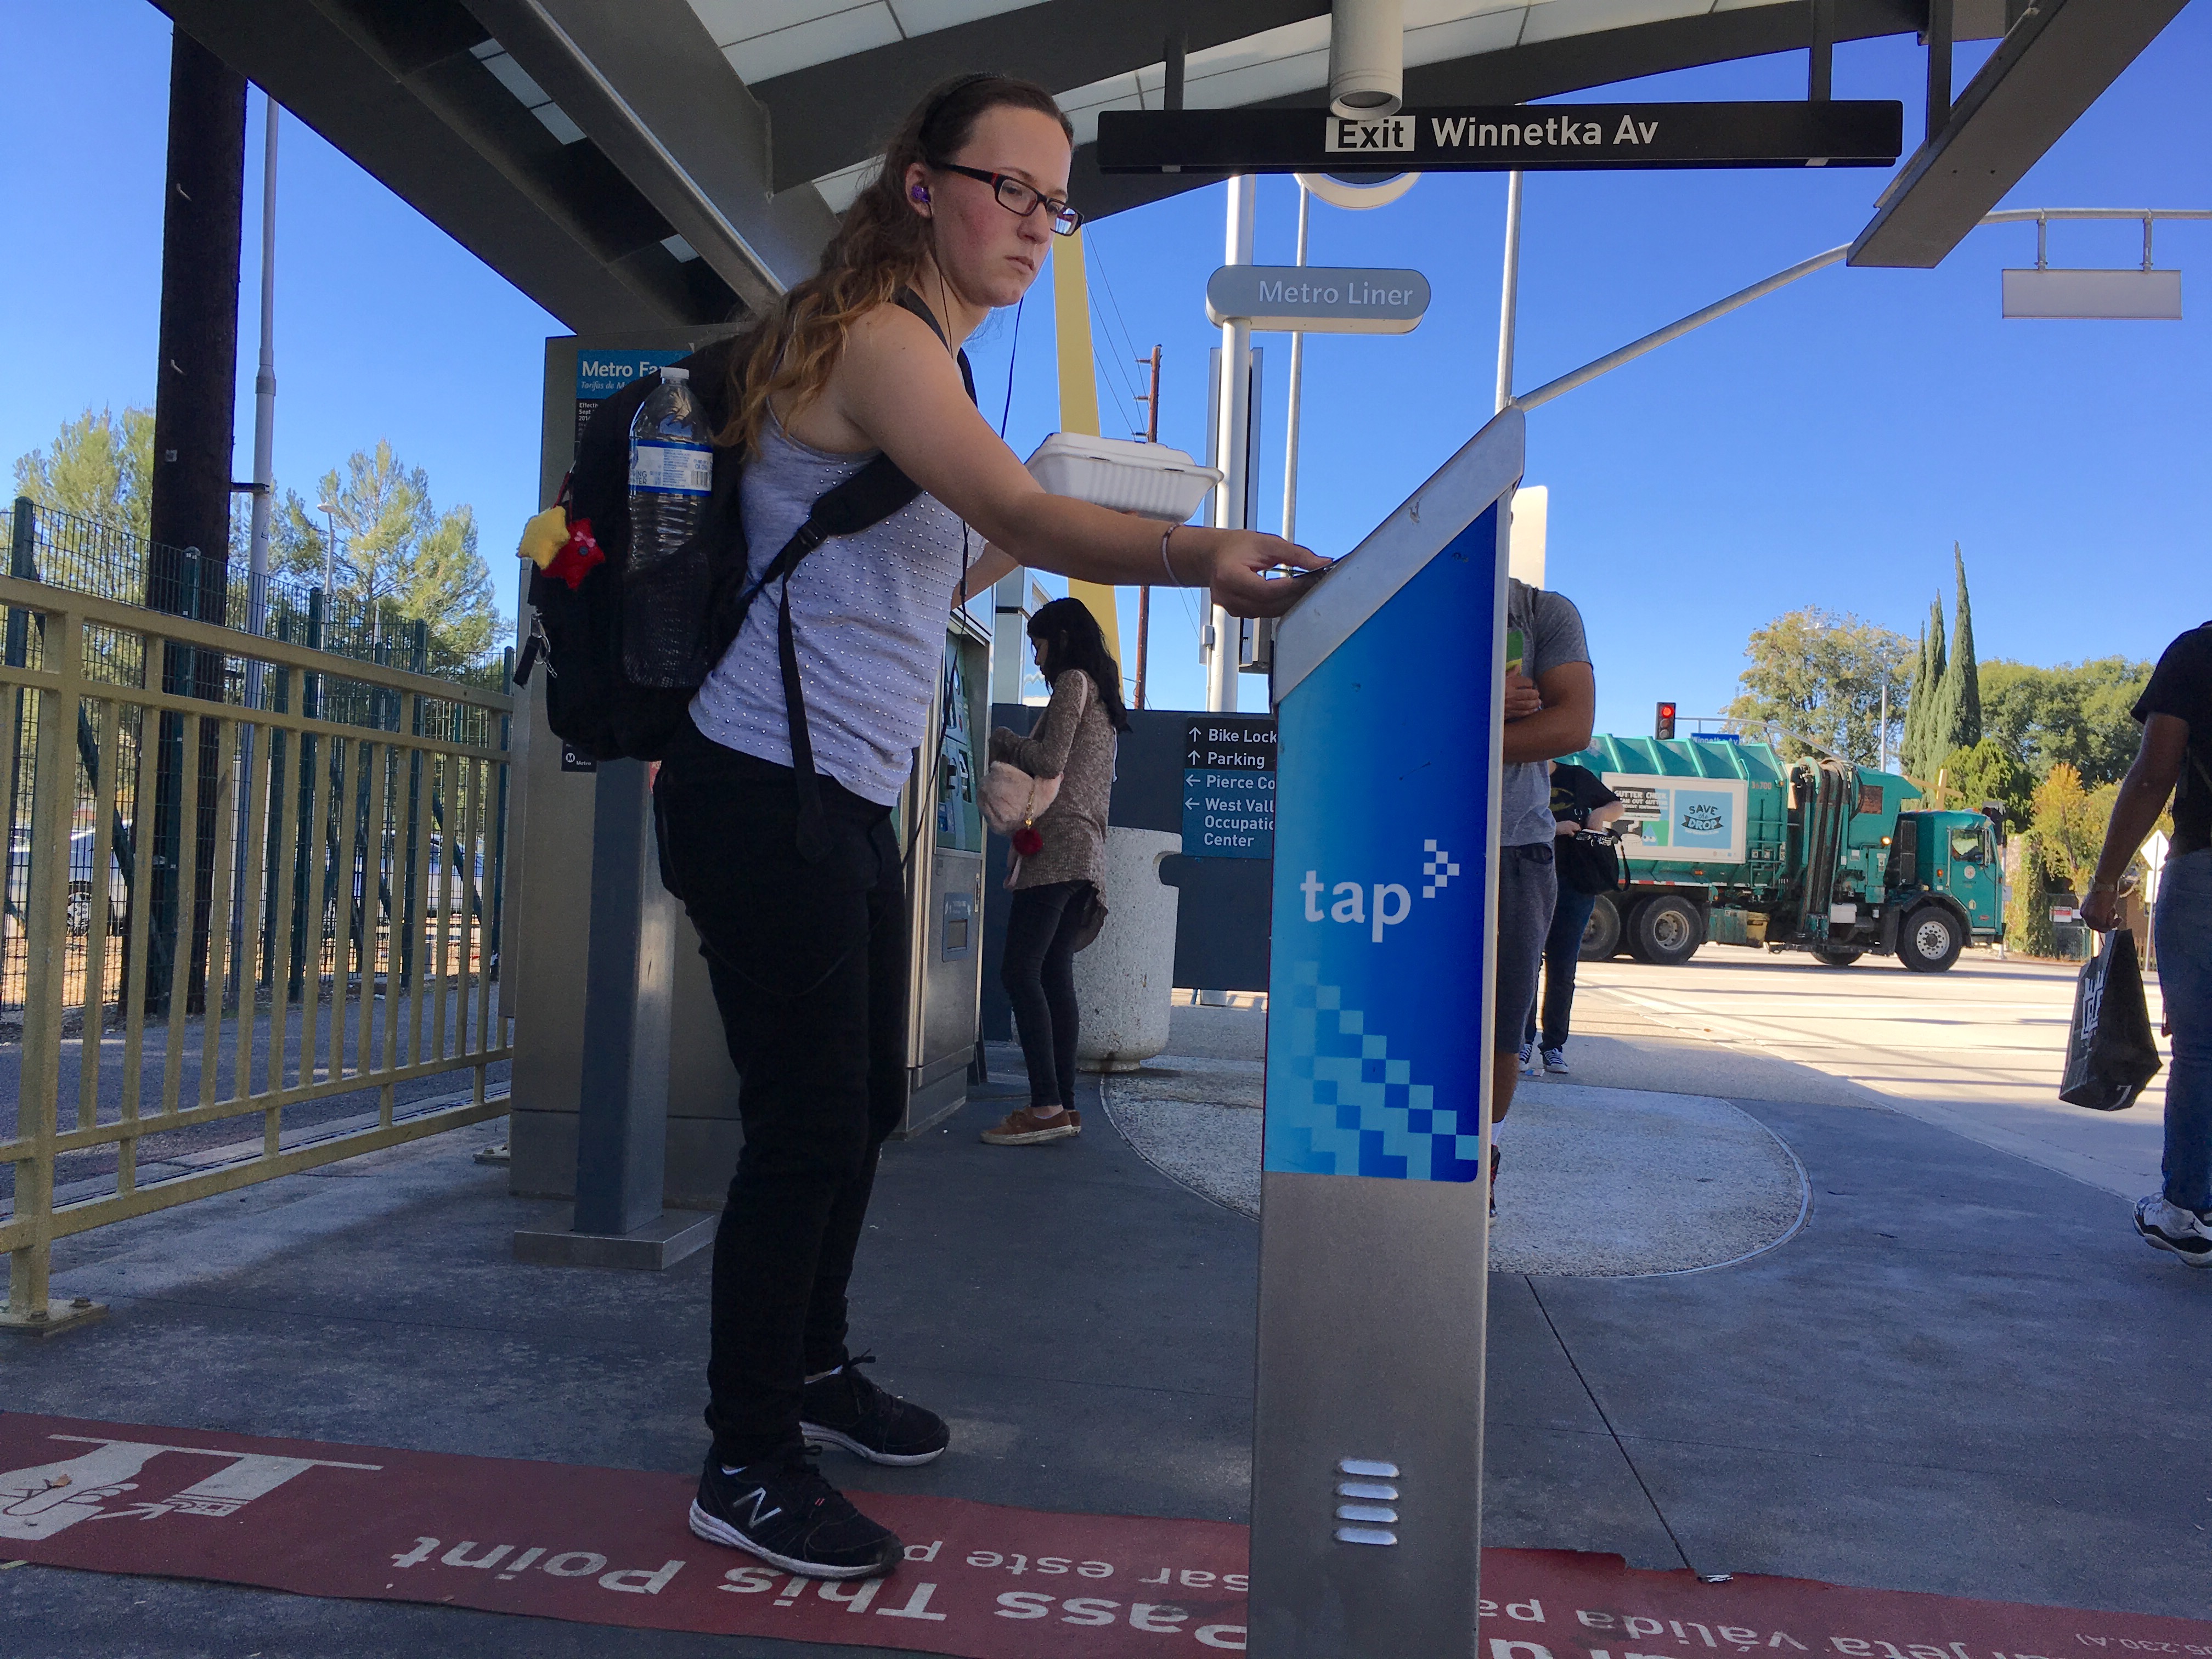 Pierce student, Alec Bick, 20, uses her student monthly tap card at the Winnetka Orange Line station in Woodland Hills, Calif. on Tuesday, Nov. 8. Students are required to have a class schedule of 12 units to get a reduced student card. President of ASO Barbara Lombrano, is pushing to lower the requirements to 6 units. Photo by Mohammad Djauhari